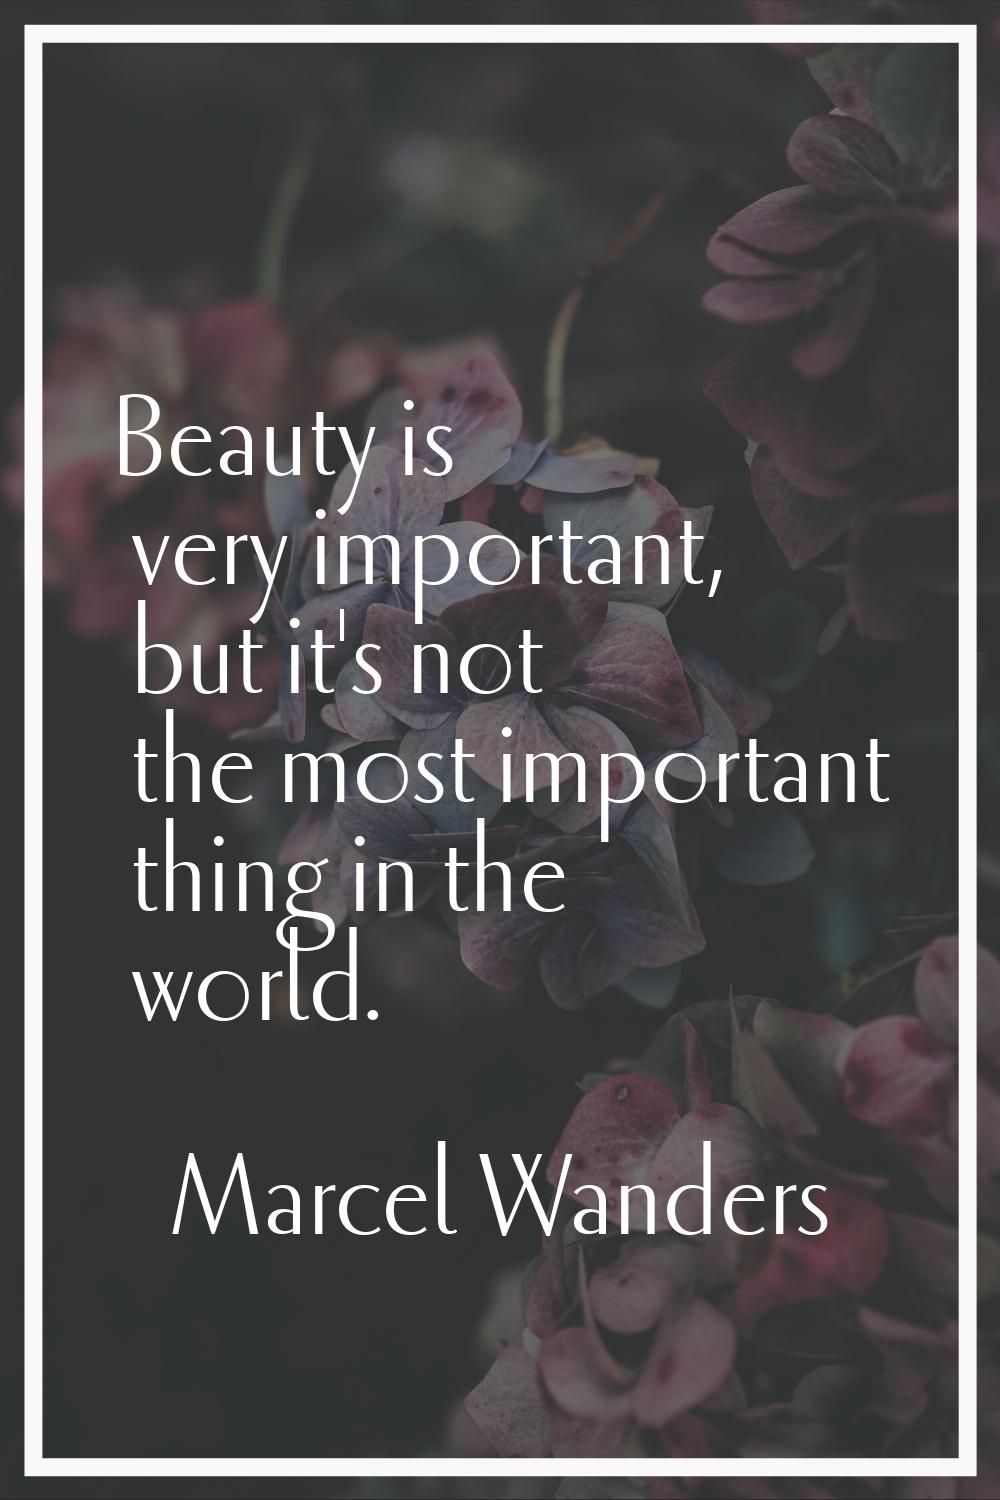 Beauty is very important, but it's not the most important thing in the world.